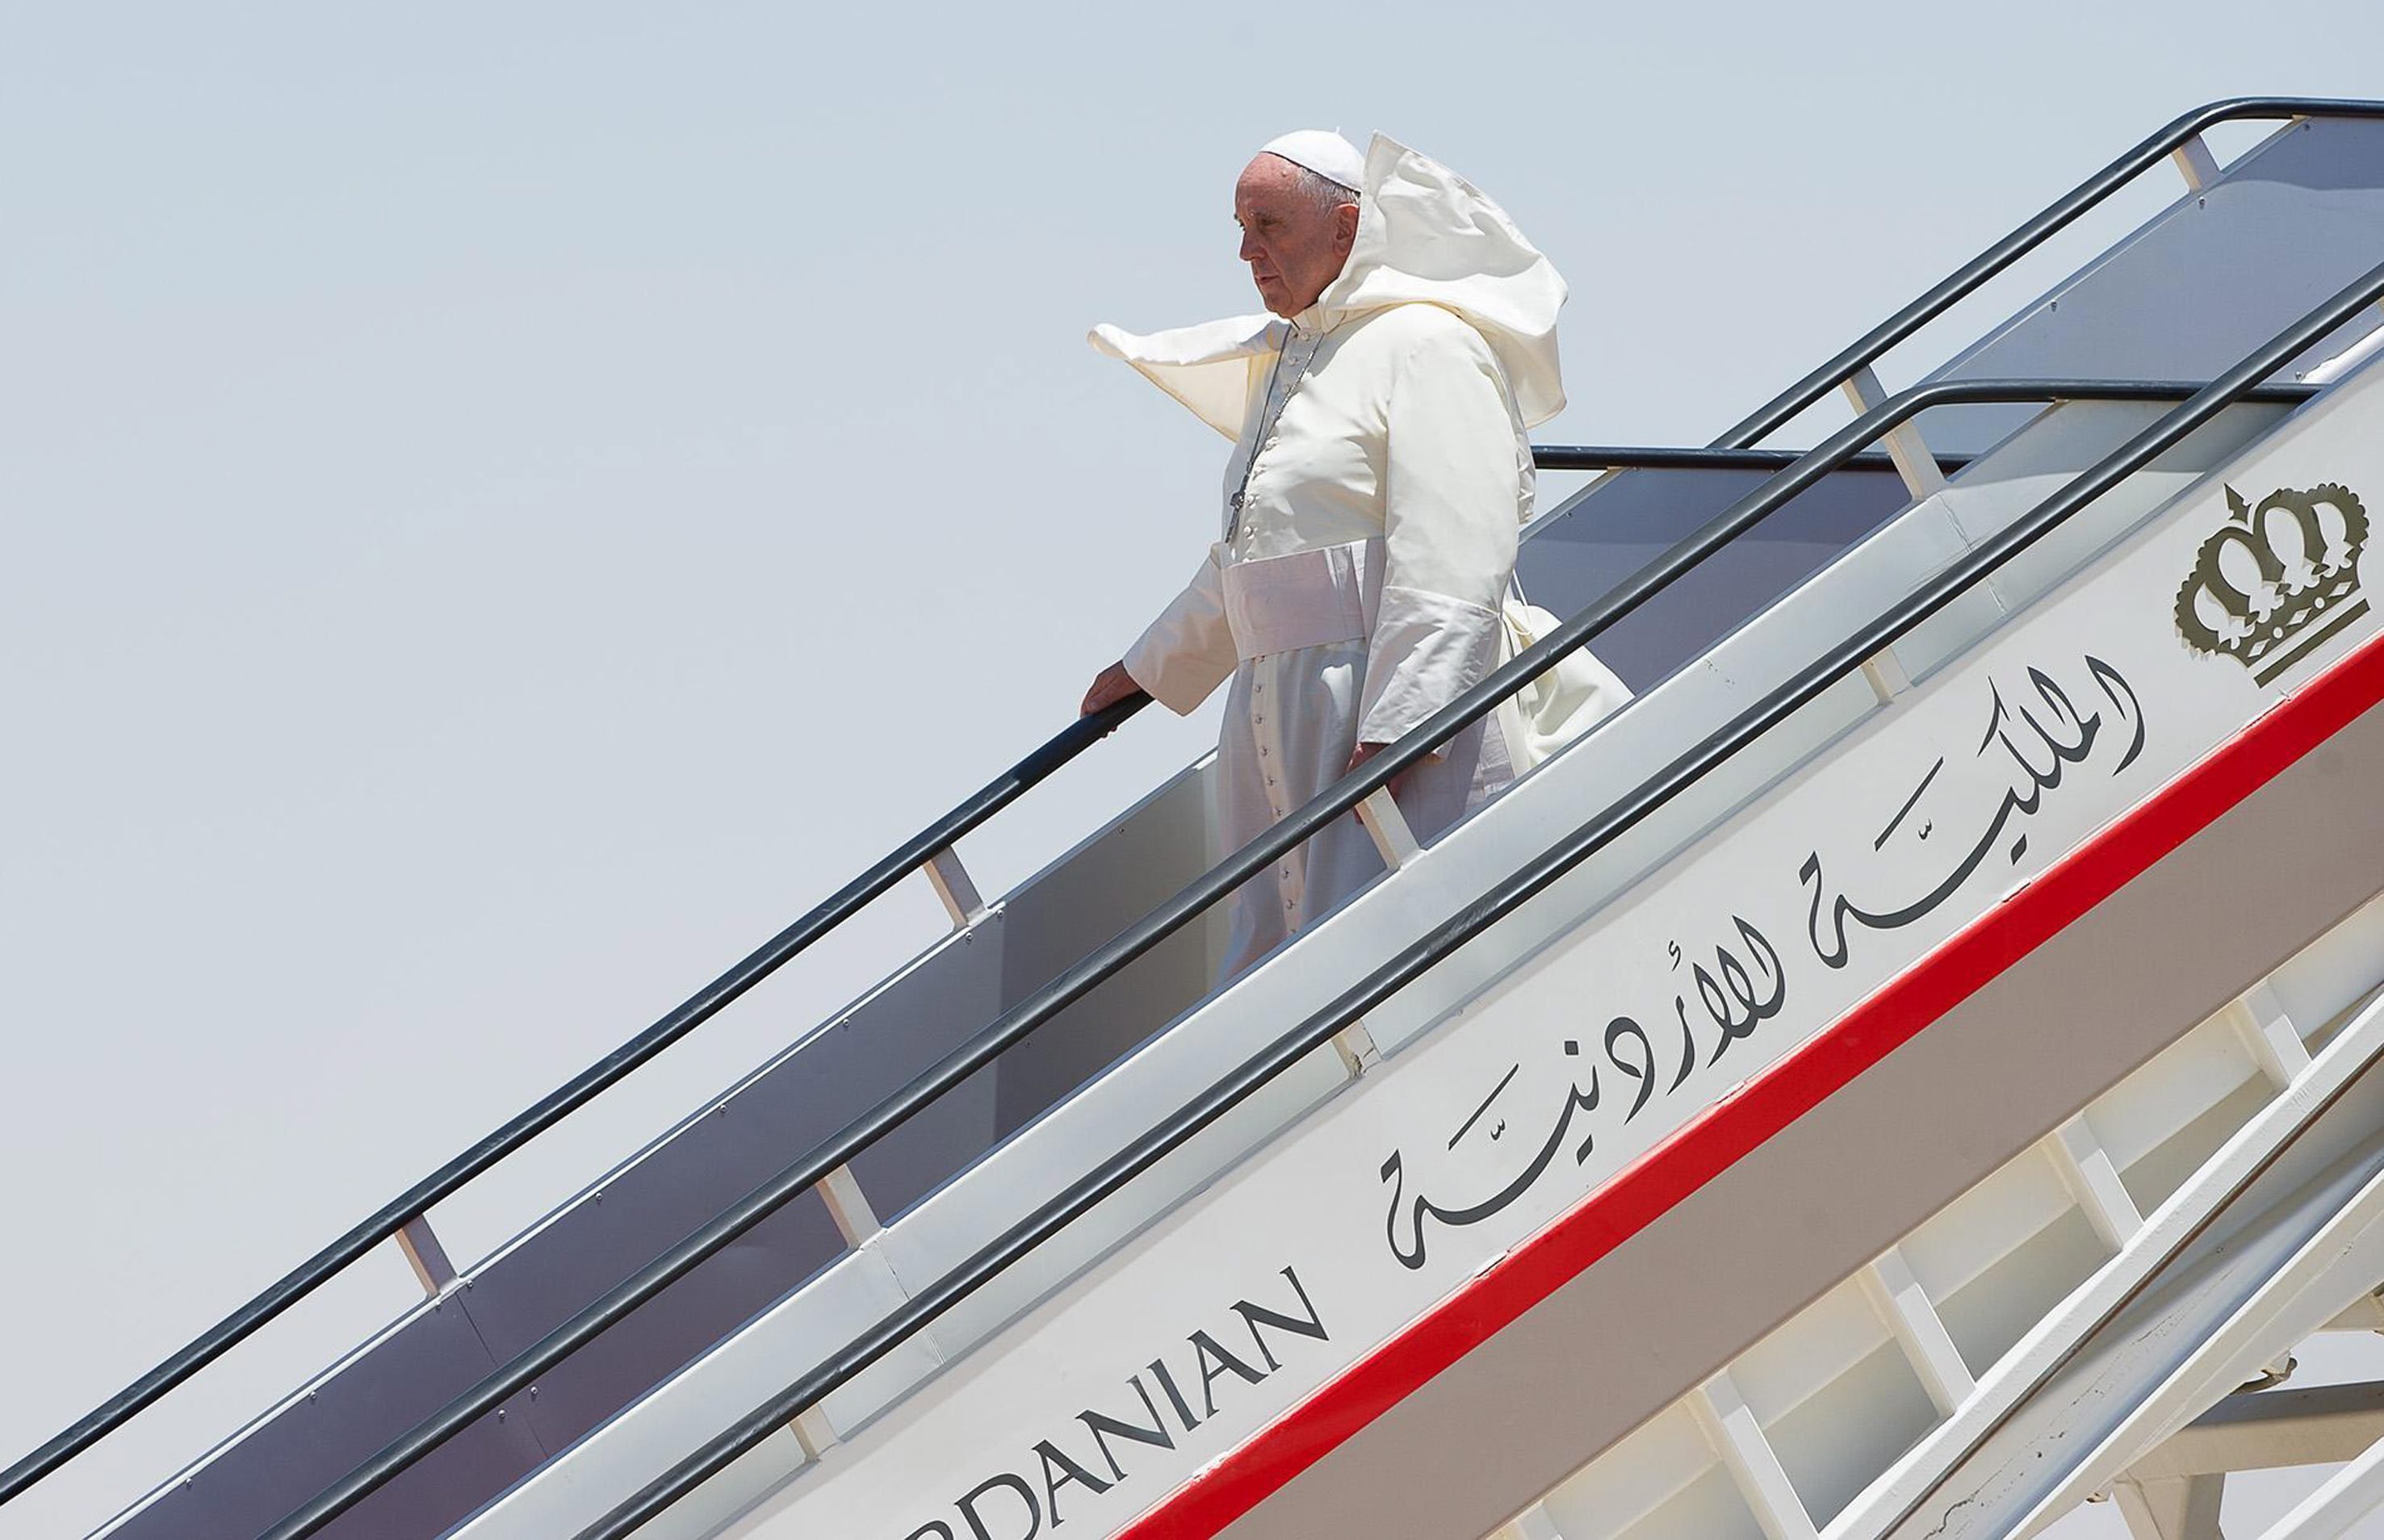 Pope Francis disembarks a plane at Queen Alia airport in Amman, Jordan upon his arrival for a papal visit on May 24, 2014. (L'osservatore Romano/EPA)